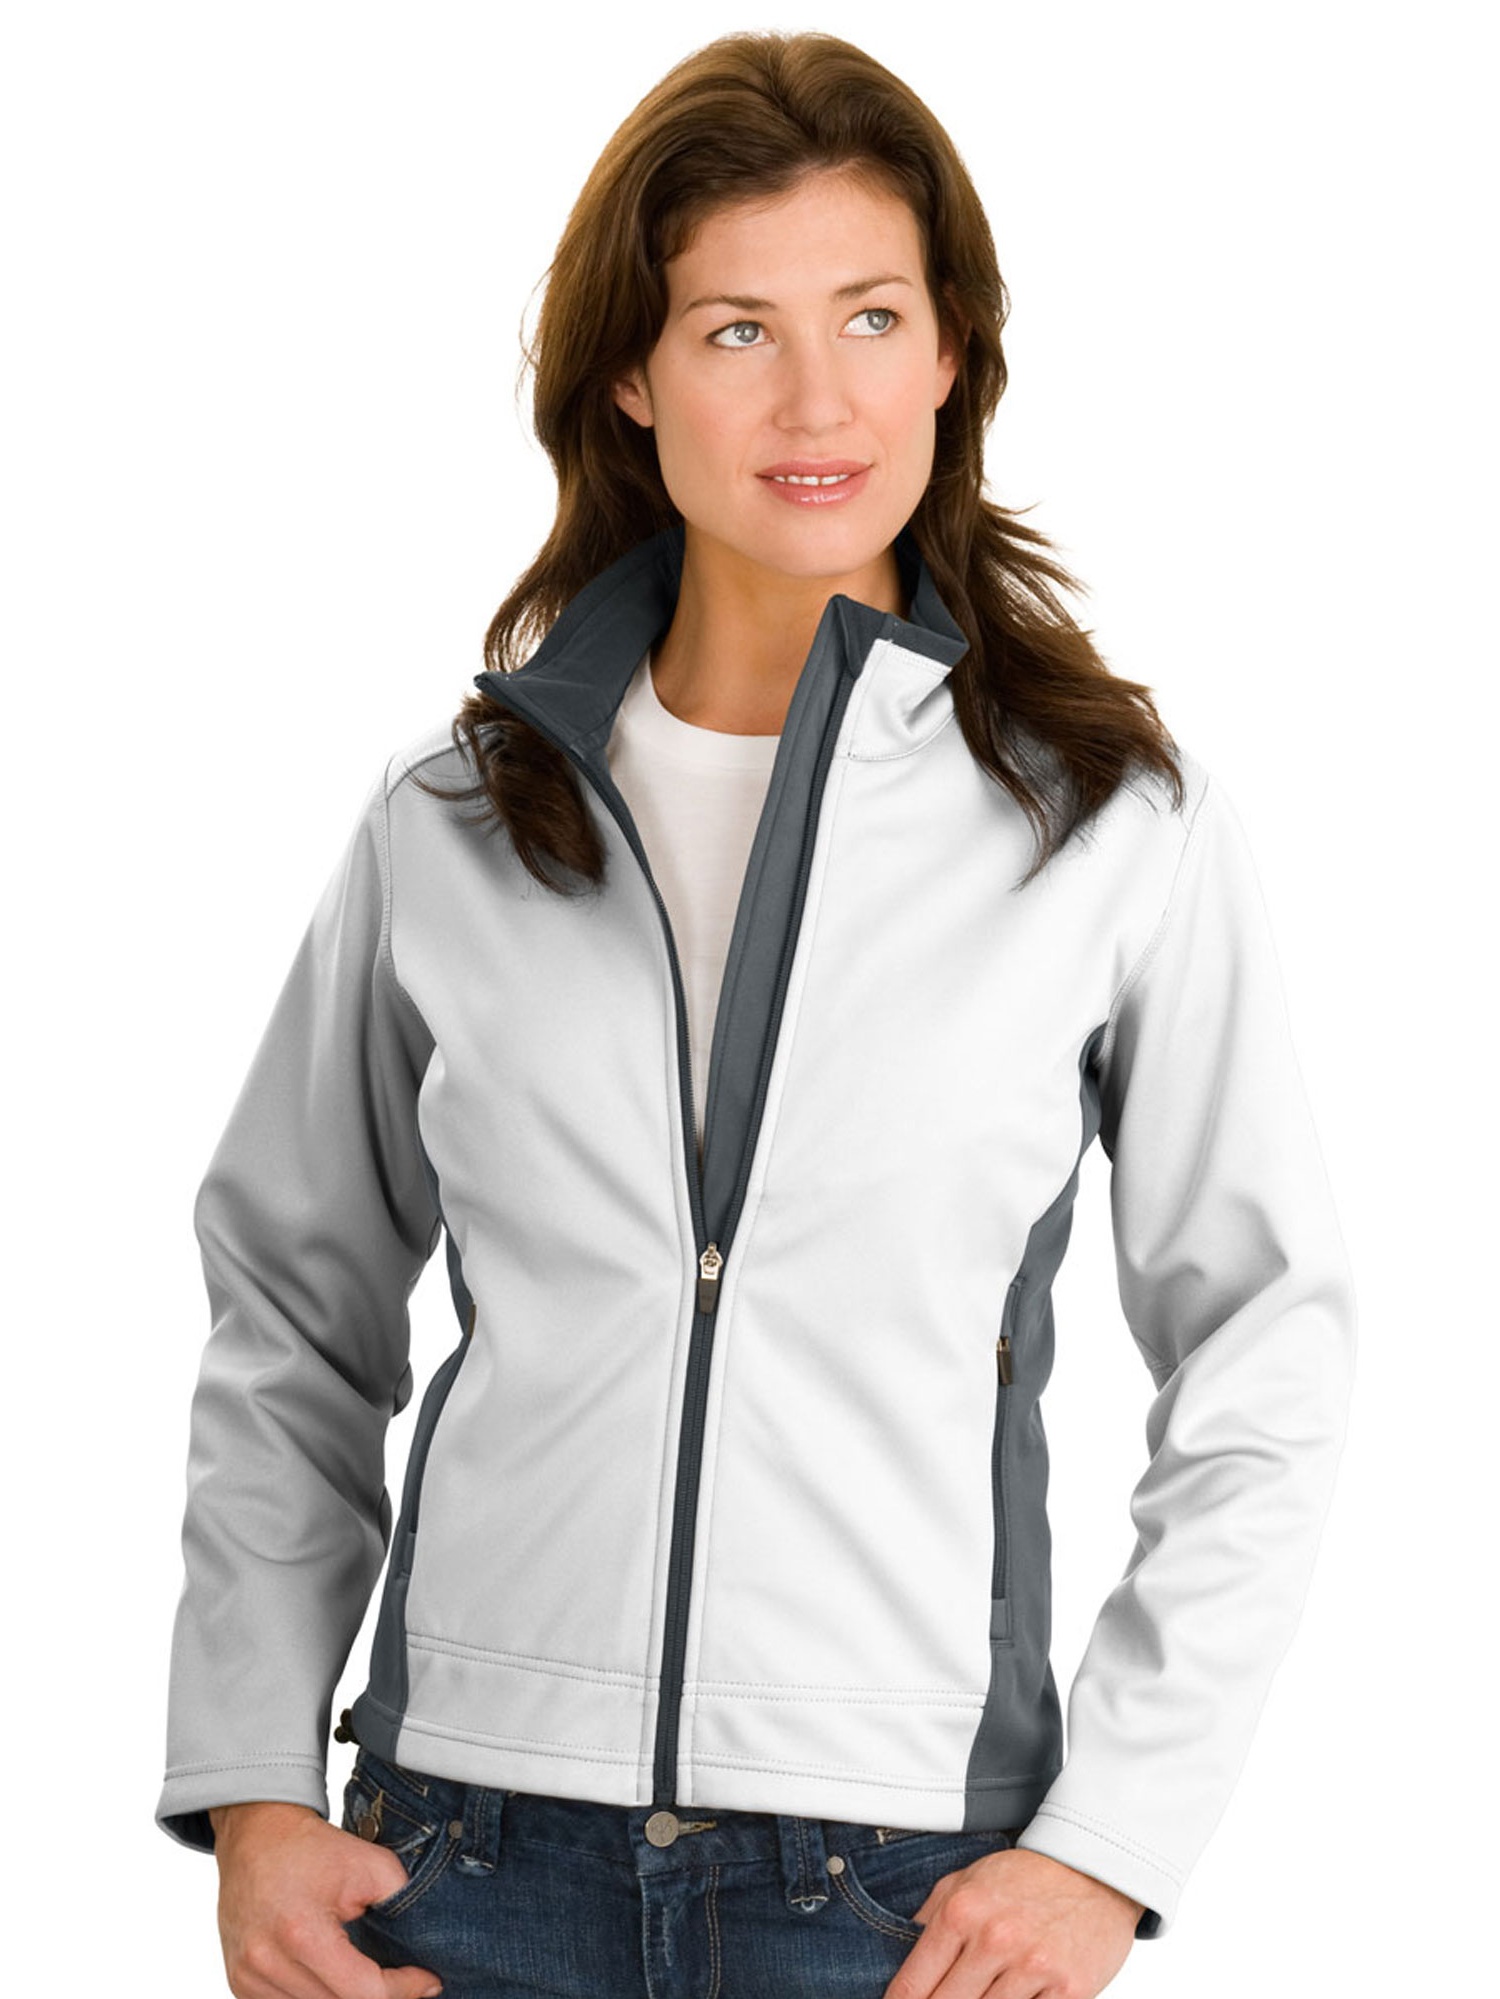 Port Authority L794 Ladies Two-Tone Soft Shell Jacket - image 1 of 2